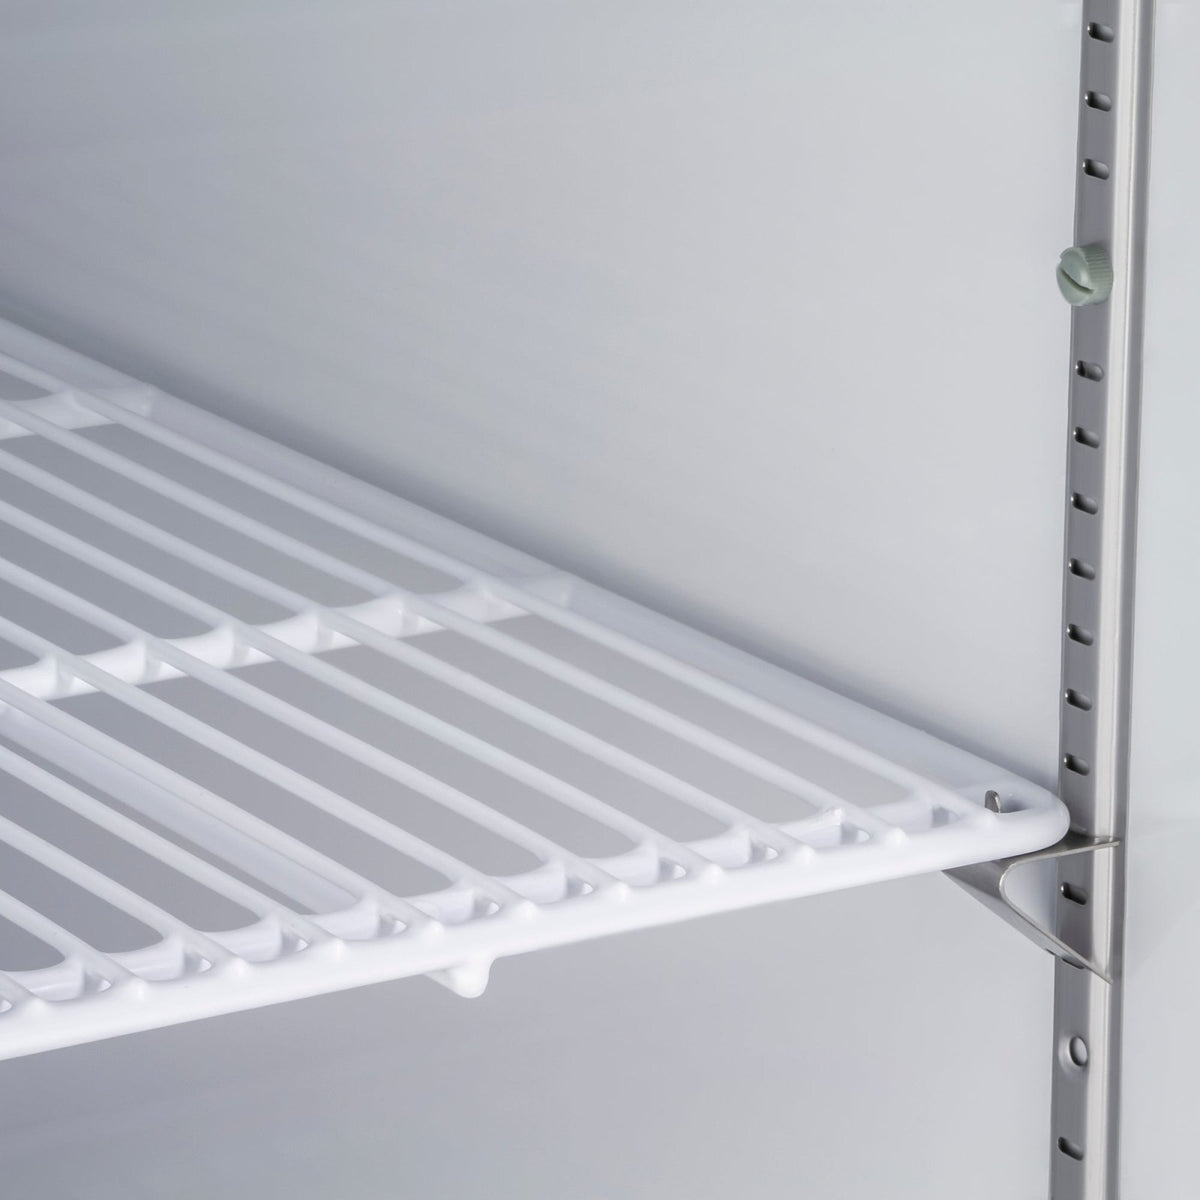 Maxx Cold MXCF - 23FDHC X - Series Single Door Reach - in Freezer, Top Mount, 26.8"W, 23 cu. ft. Storage Capacity, in Stainless Steel - TheChefStore.Com